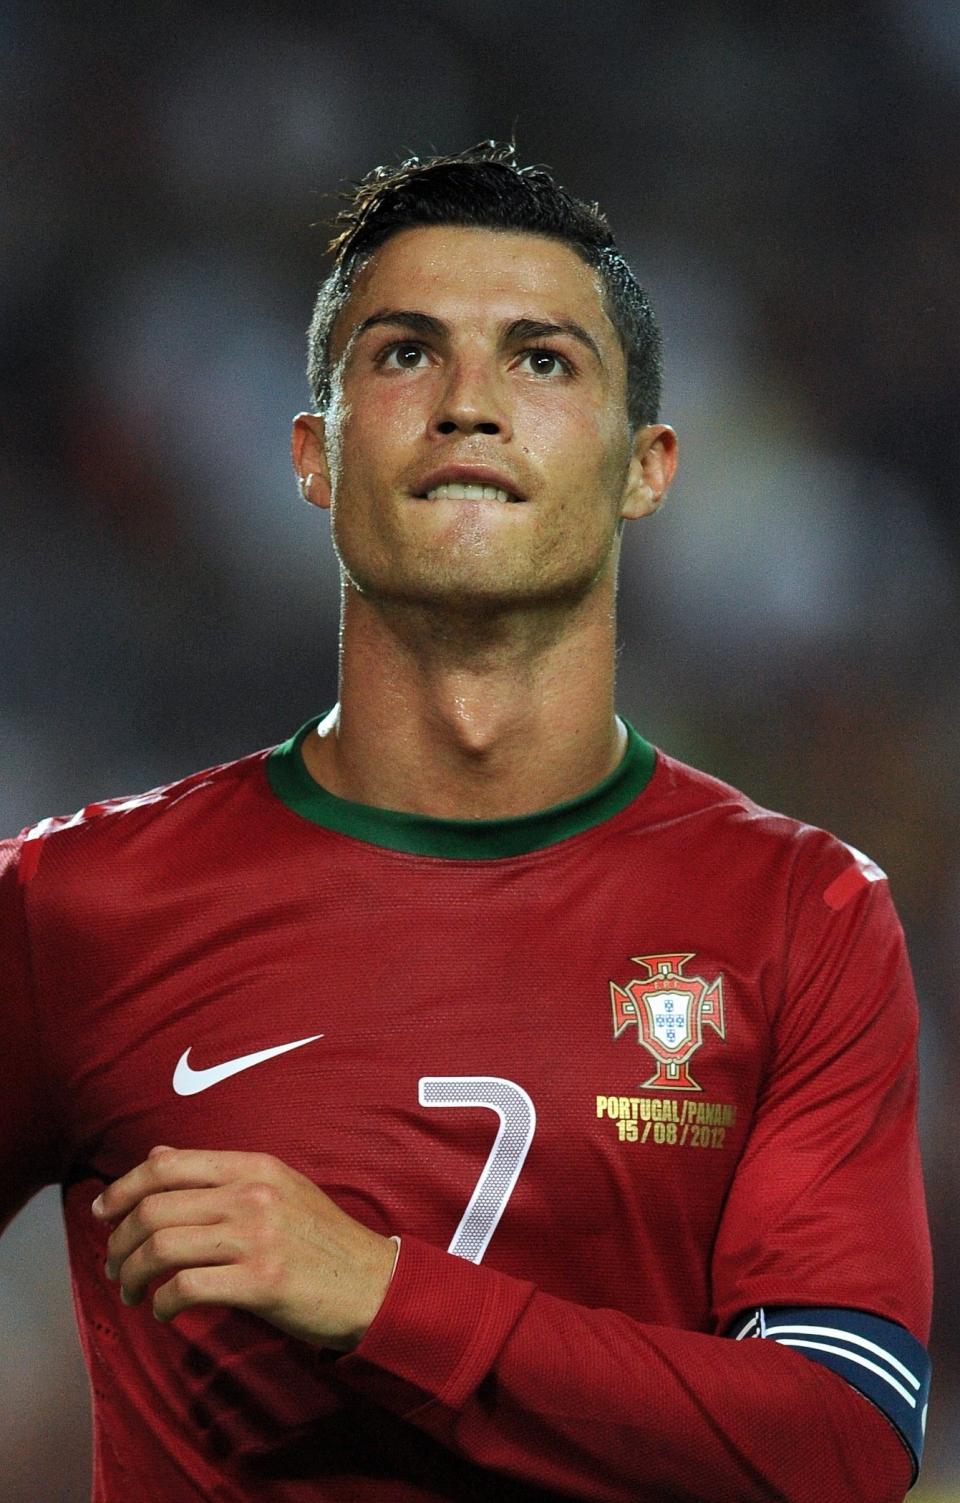 Popular soccer player Cristiano Ronaldo said, “We must respect the choices made by anyone, because, after all, all citizens should have the exact same rights and responsibilities,” when asked about the passage of <a href="http://www.advocate.com/news/daily-news/2010/06/02/cristiano-ronaldo-supports-gay-marriage">gay marriage in his home country of Portugal</a> in 2010.